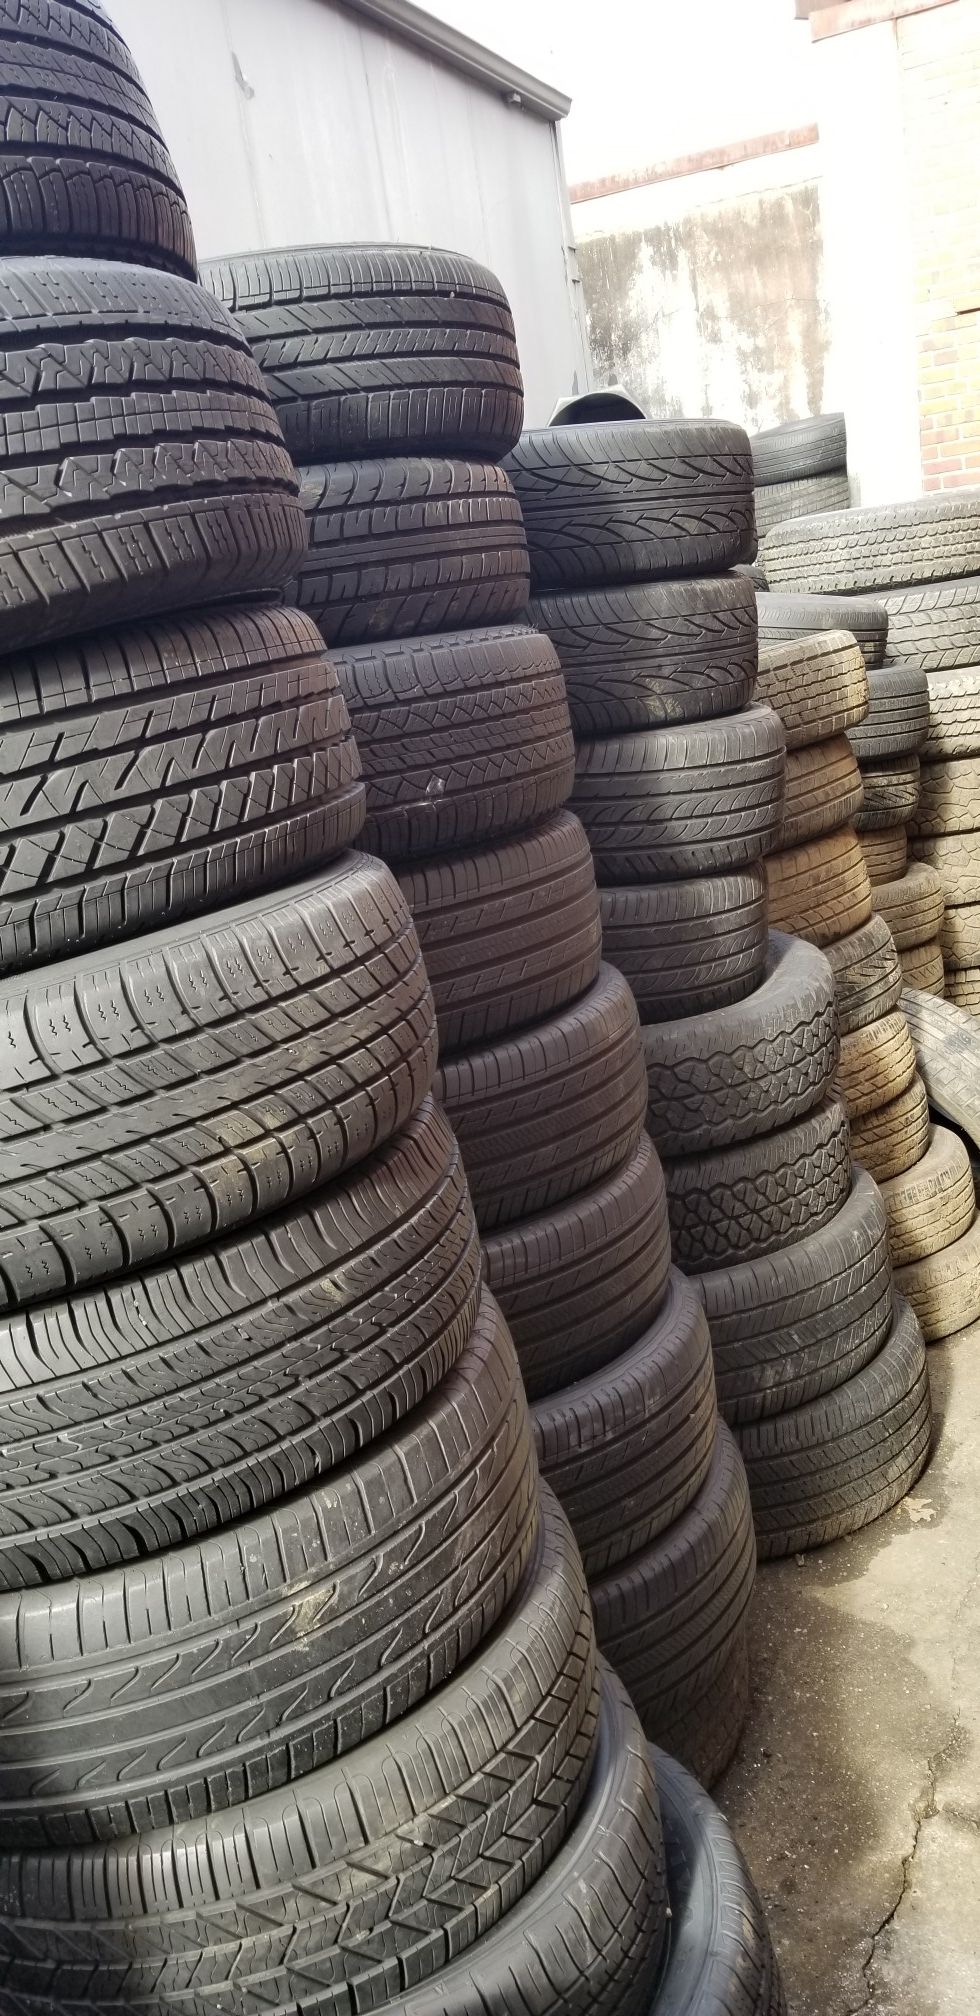 Used tires of any size and brand